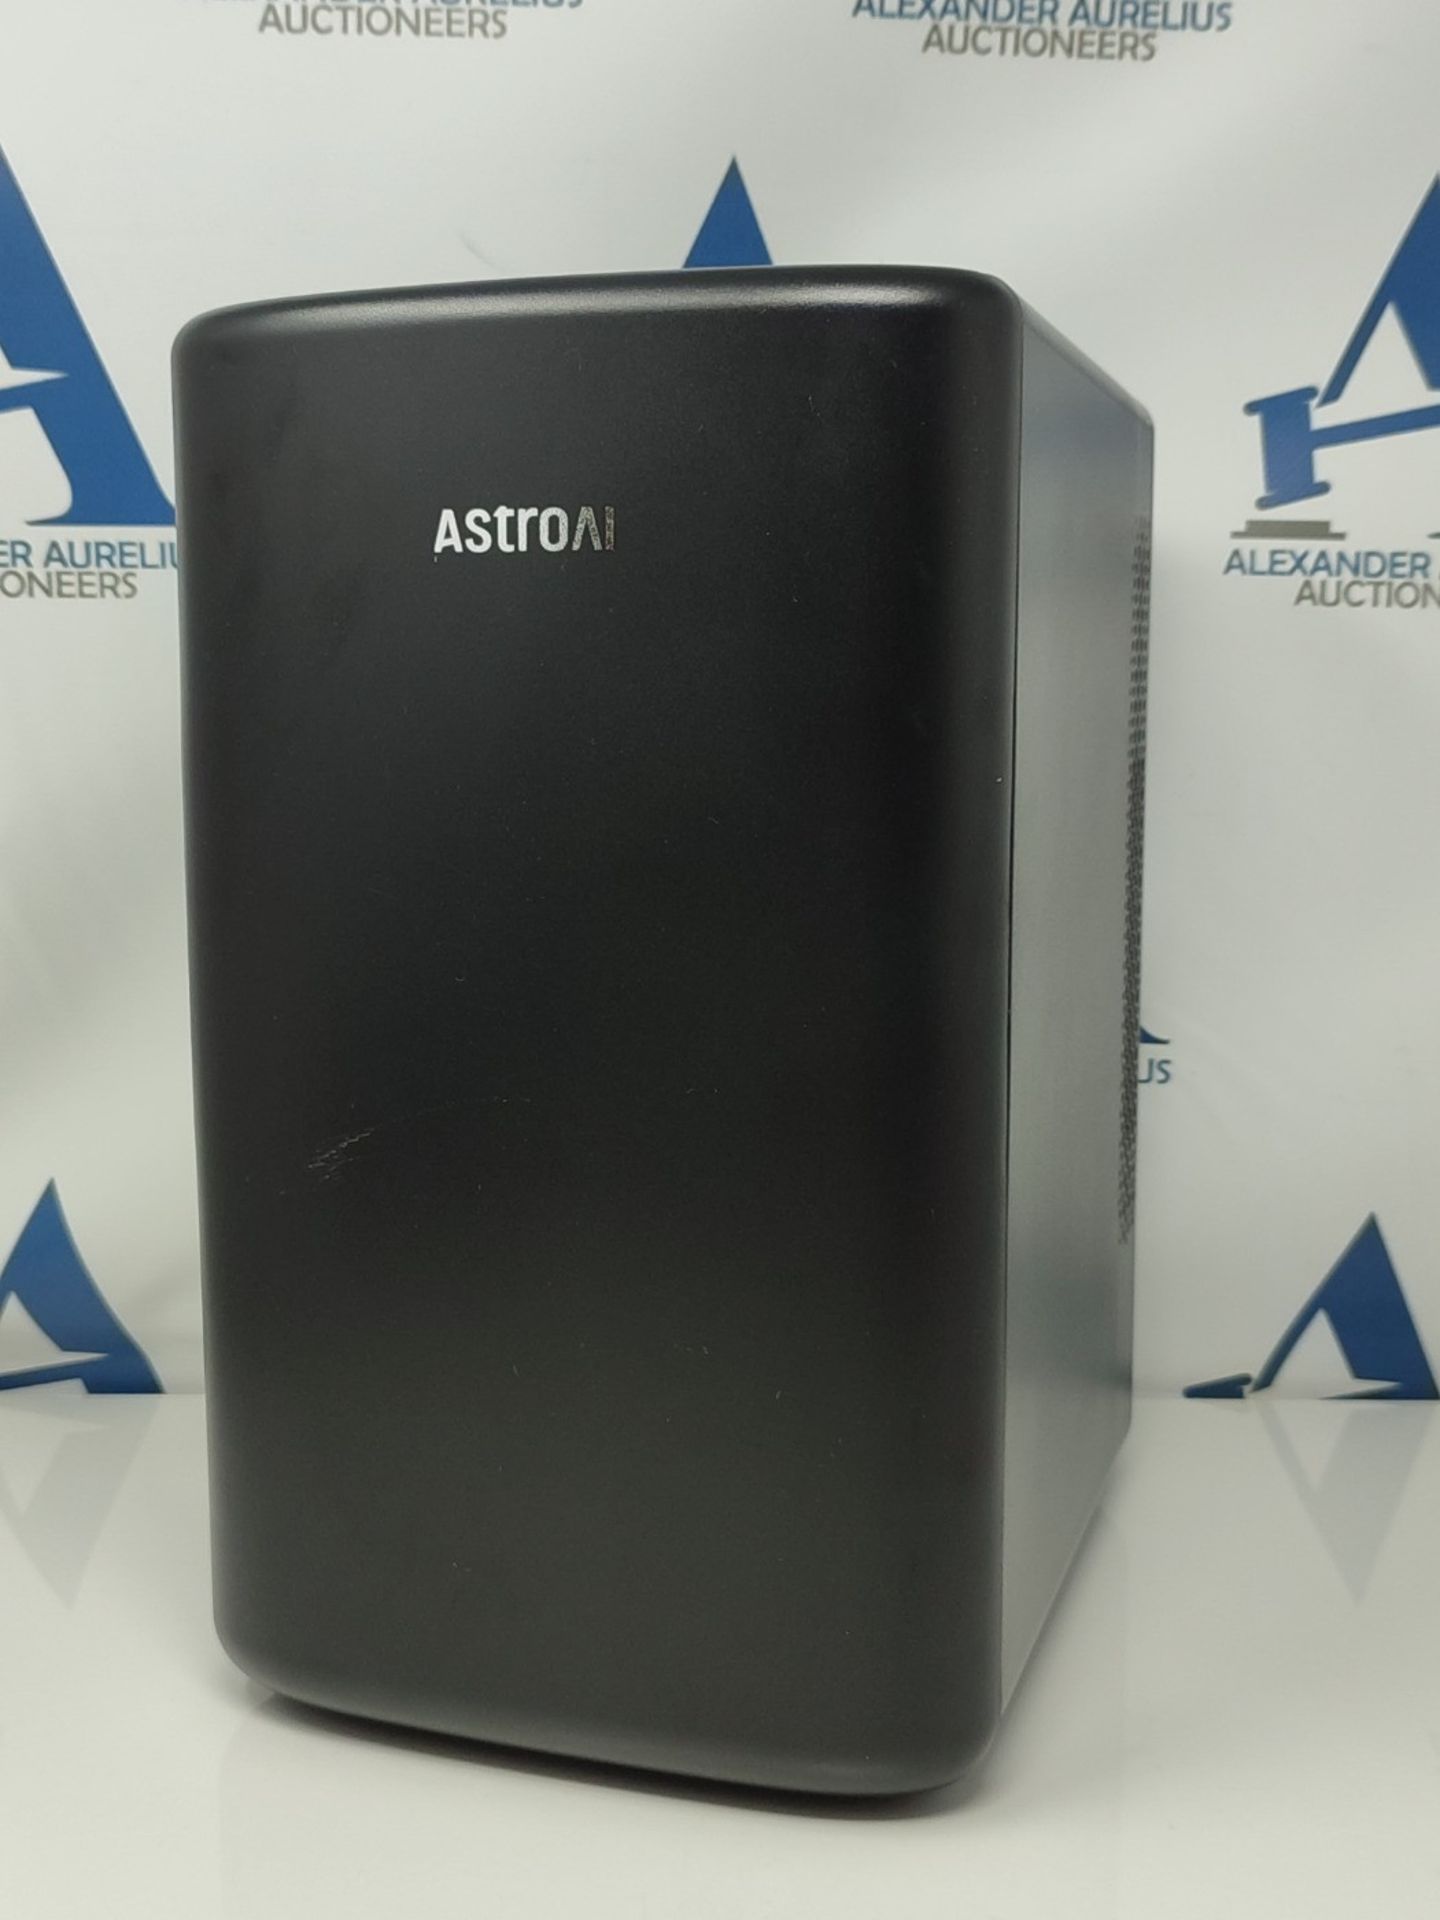 AstroAI Mini Fridge 6 Litre / 8 Can | Cooler and Warmer | AC/DC | Small Fridge for Bed - Image 2 of 2